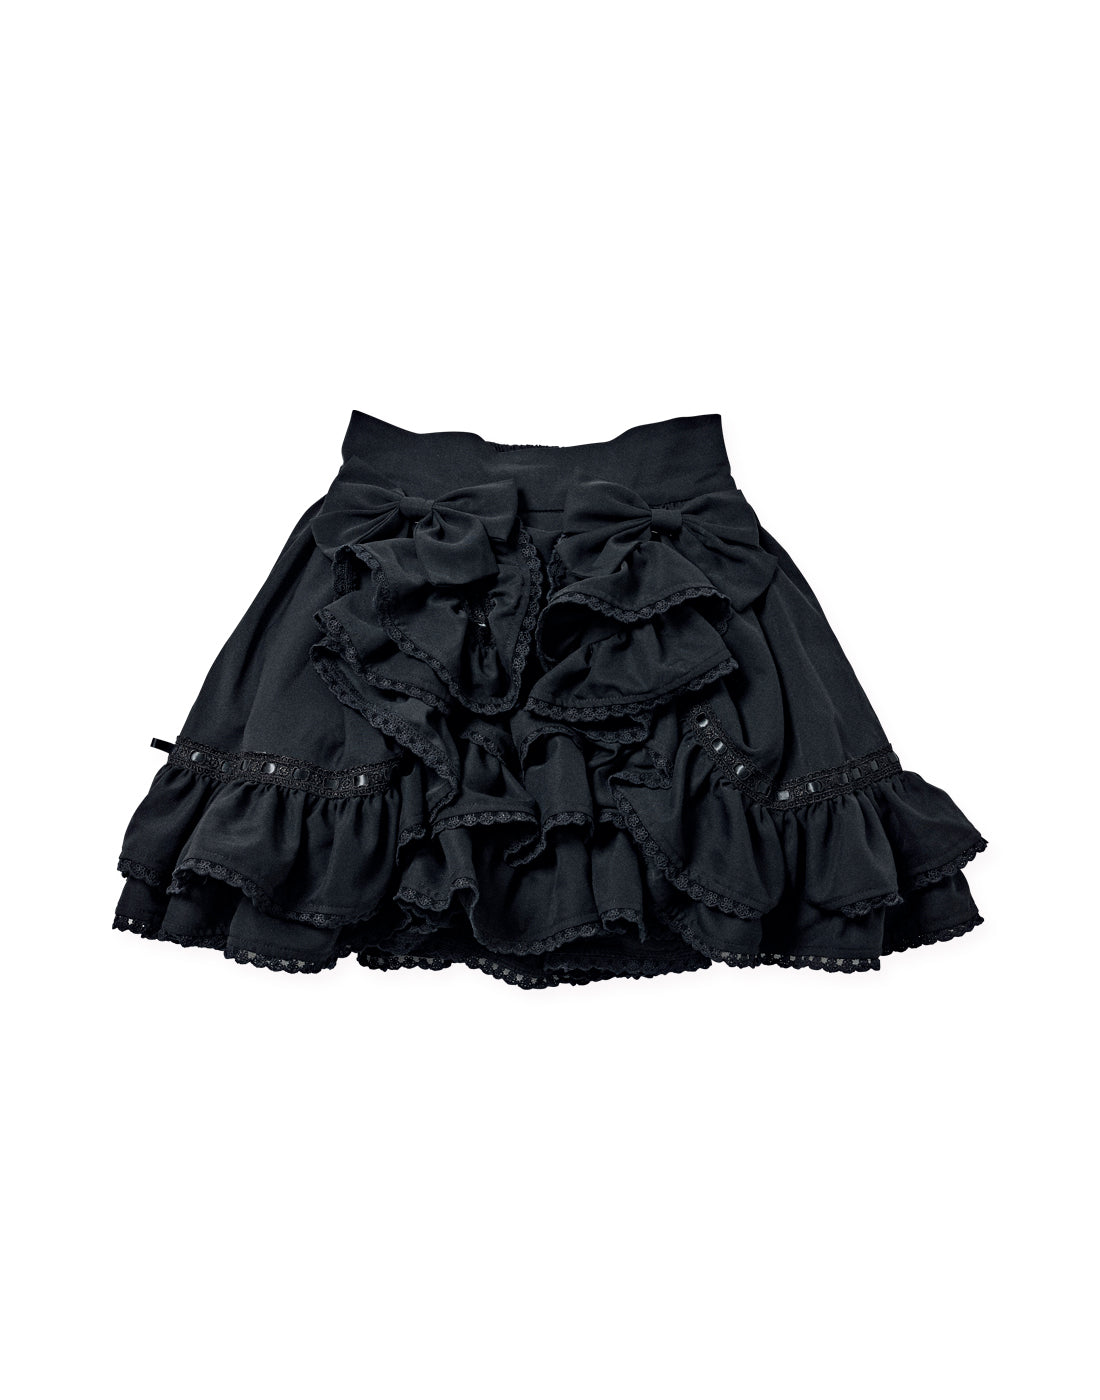 My only Doll fril skirt